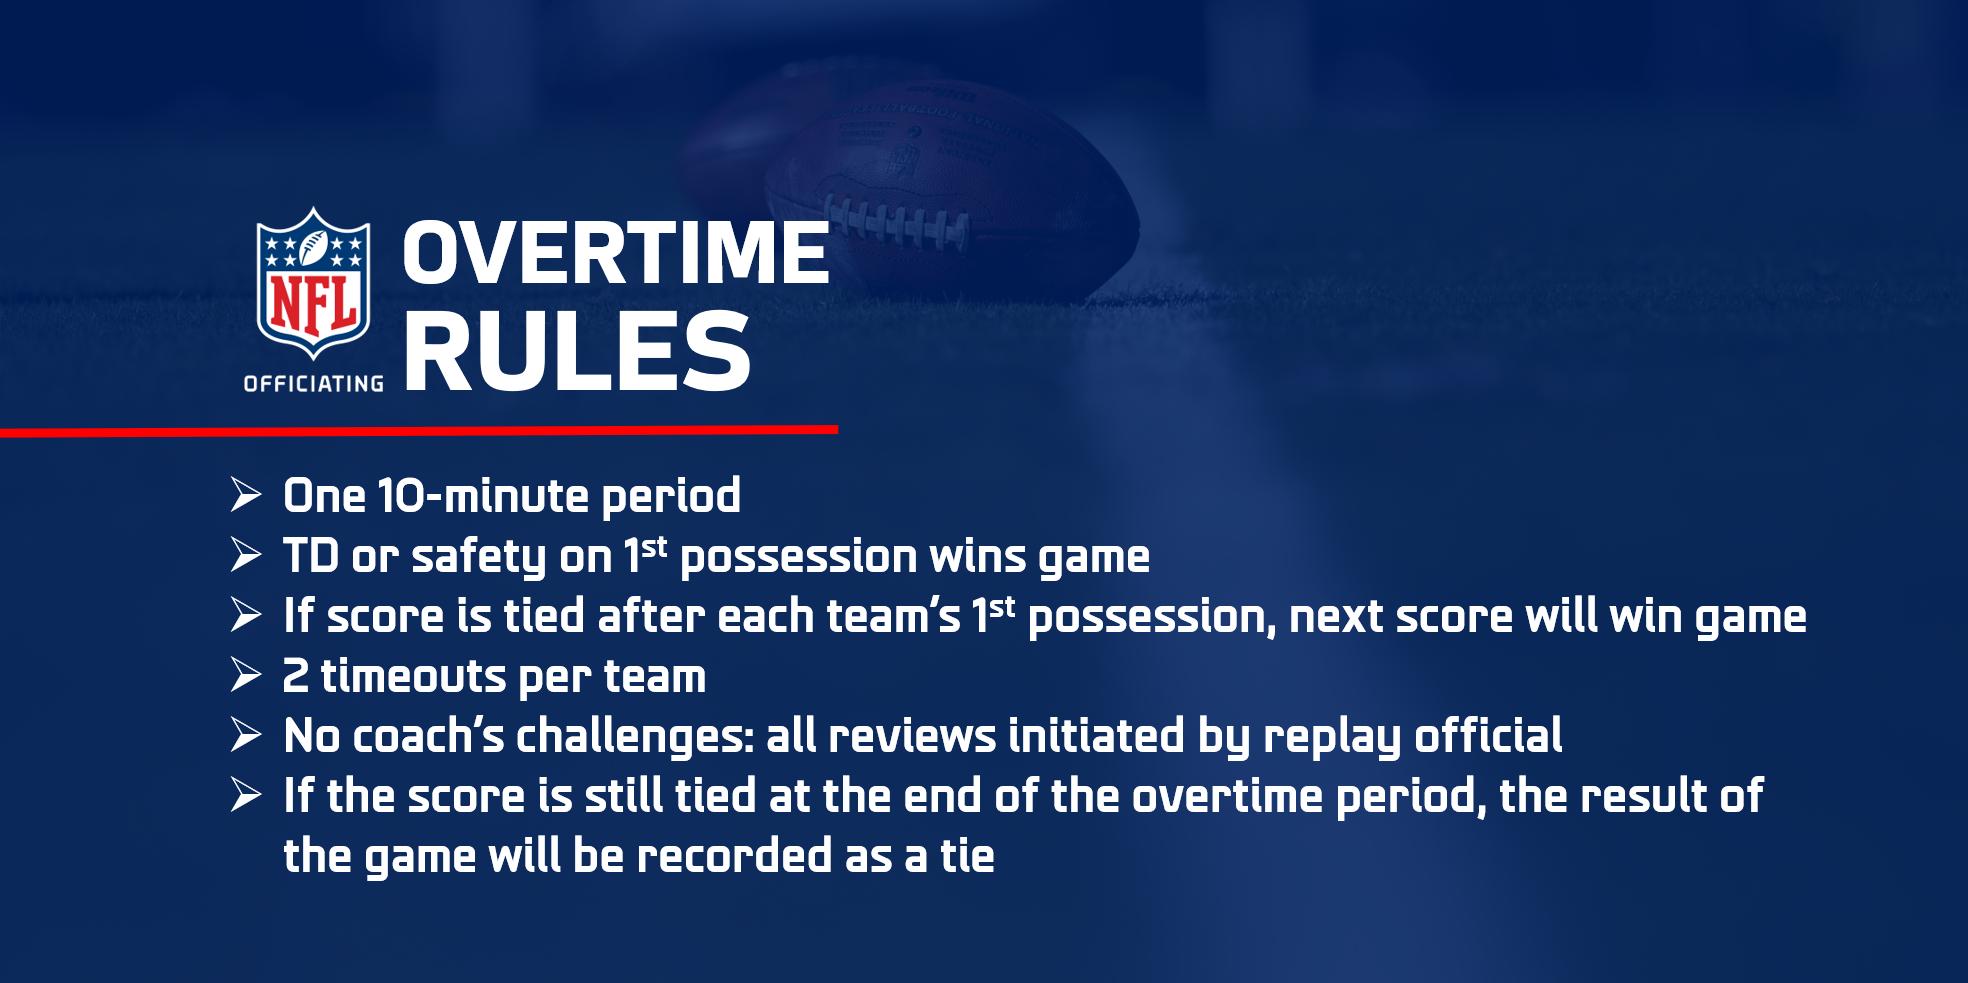 nfl new overtime rules 2022